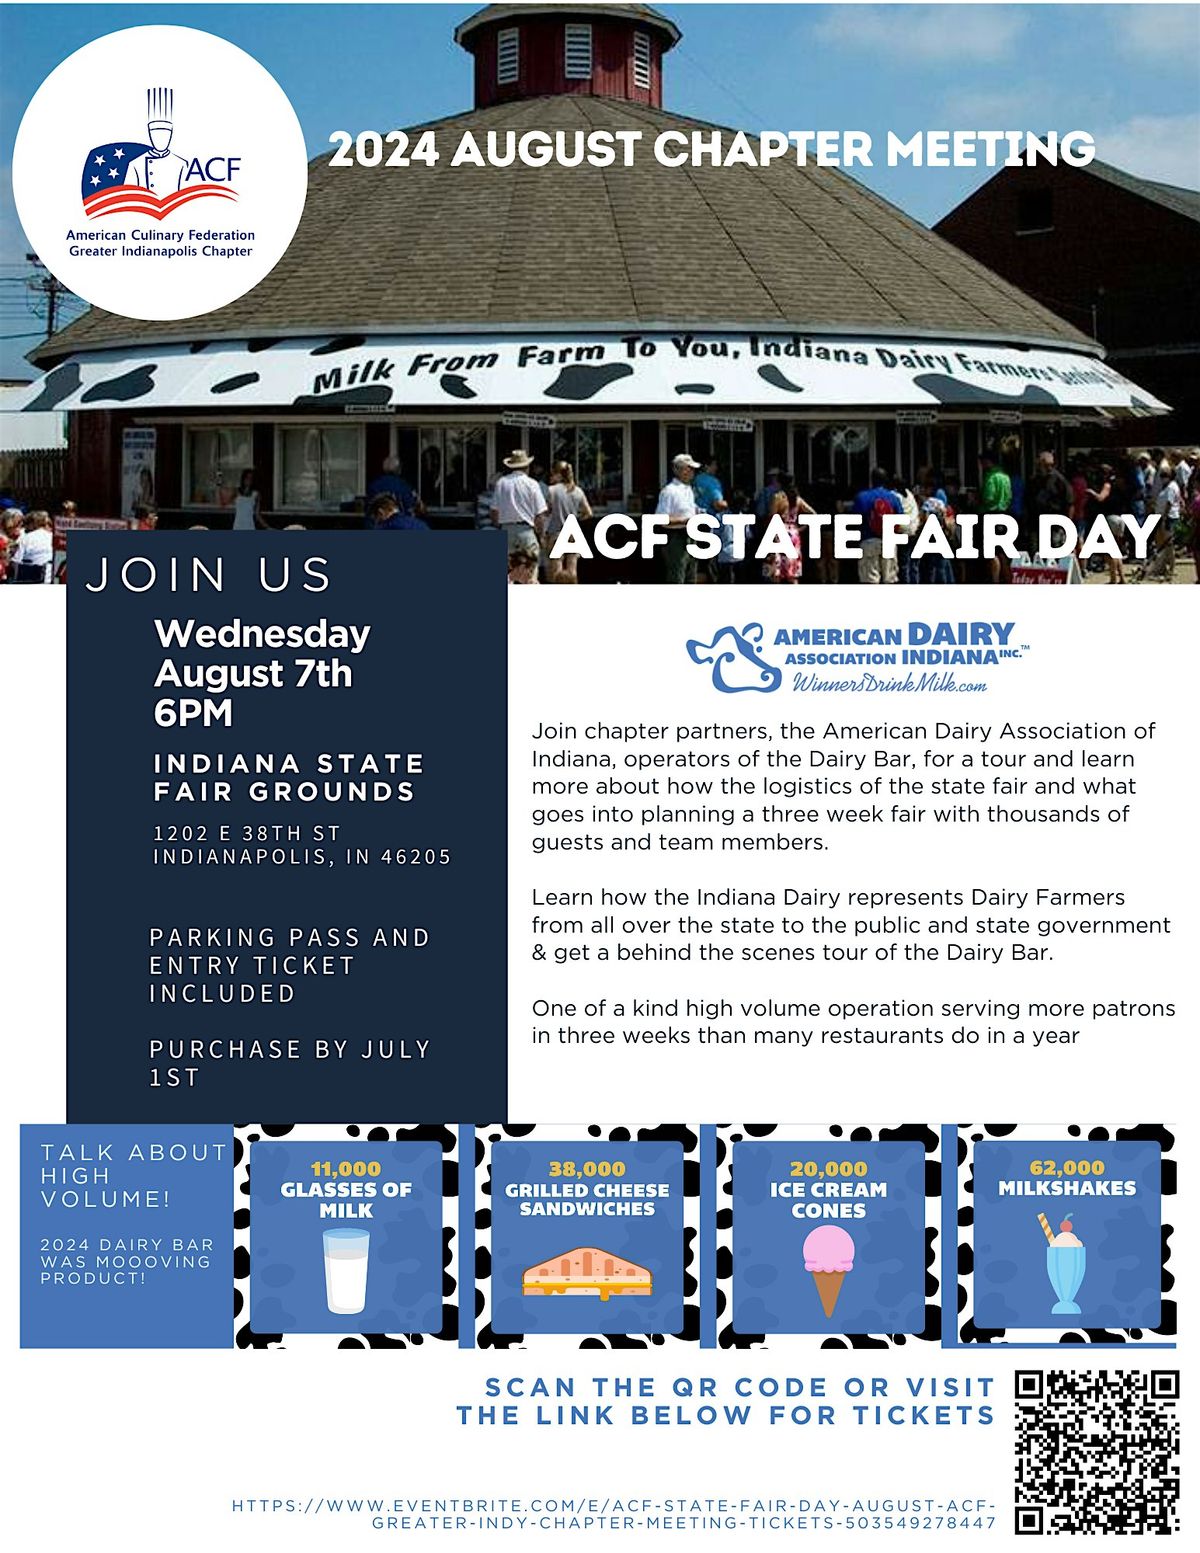 ACF State Fair Day: August ACF Greater Indy Chapter Meeting